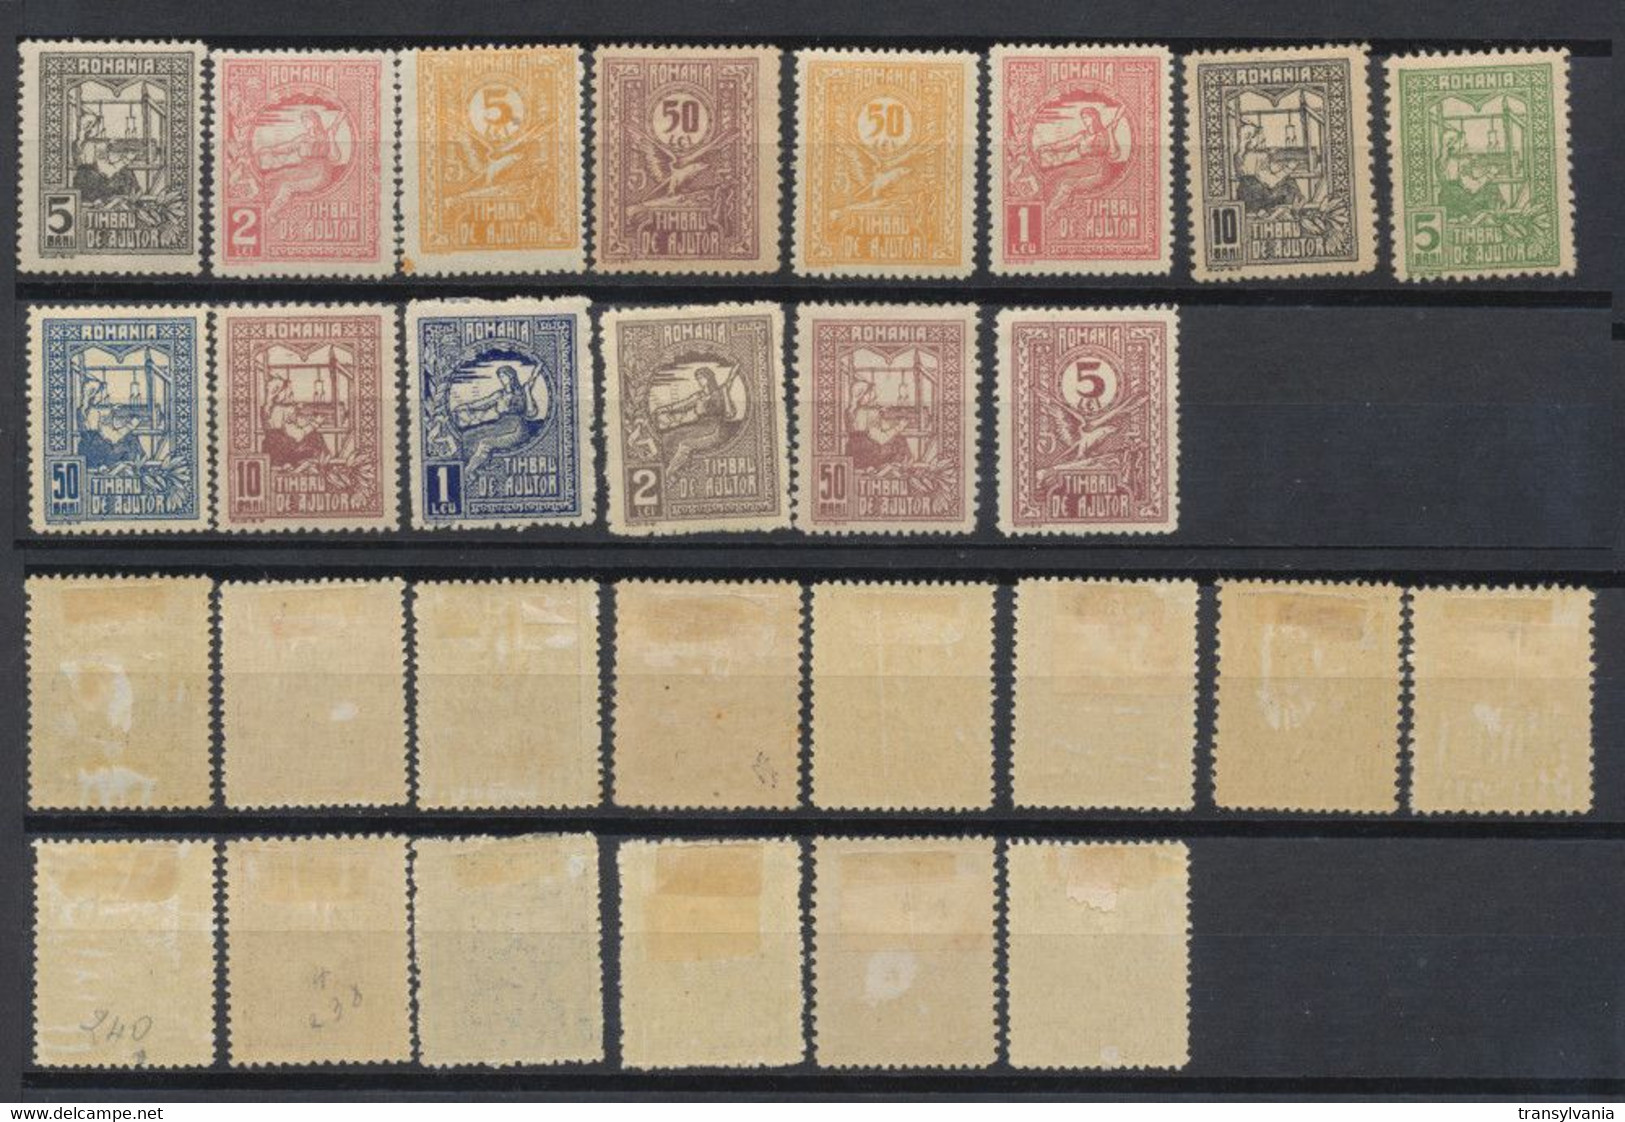 Romania 1916-1918 Rare Set Of 14 Relief Aid Stamps MLH, Only 200 Complete Sets Issued - Errors, Freaks & Oddities (EFO)